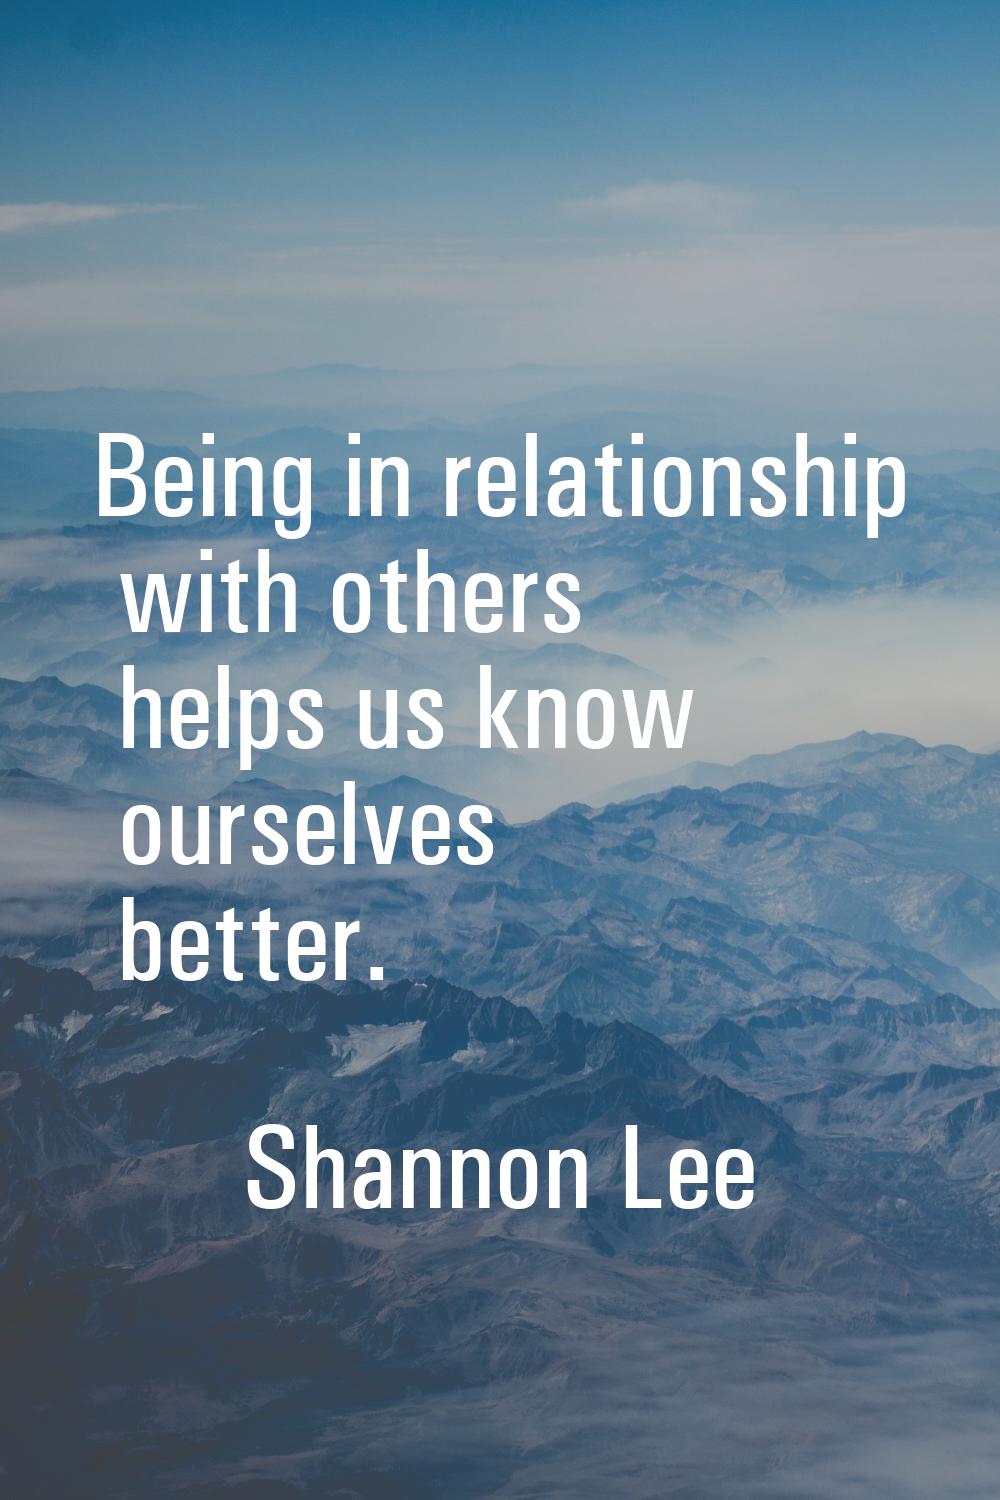 Being in relationship with others helps us know ourselves better.